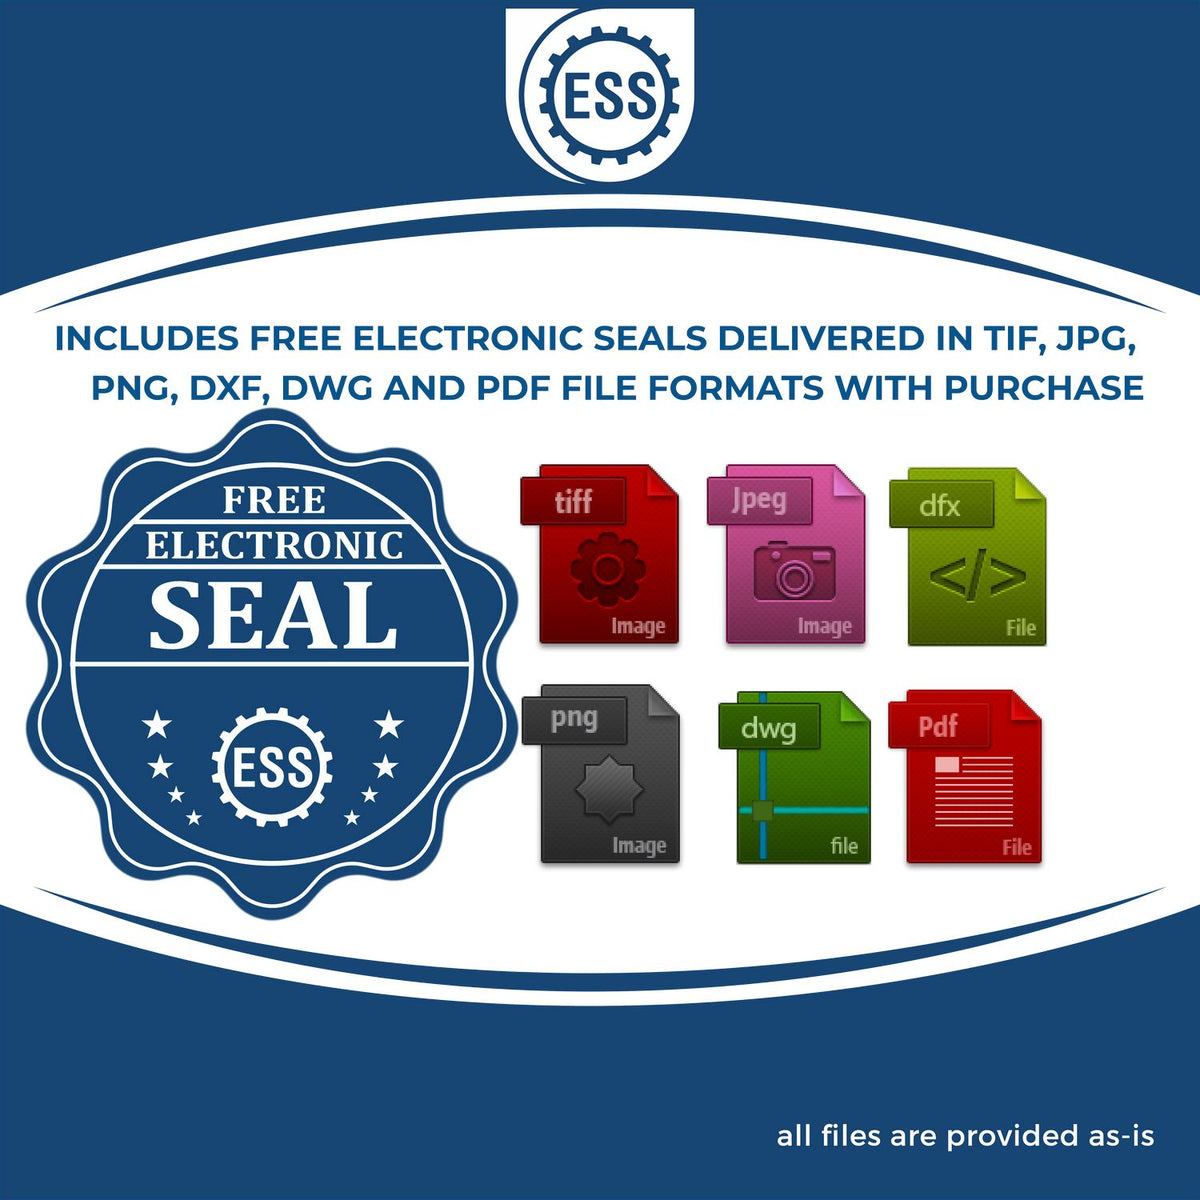 An infographic for the free electronic seal for the Gift Kansas Architect Seal illustrating the different file type icons such as DXF, DWG, TIF, JPG and PNG.